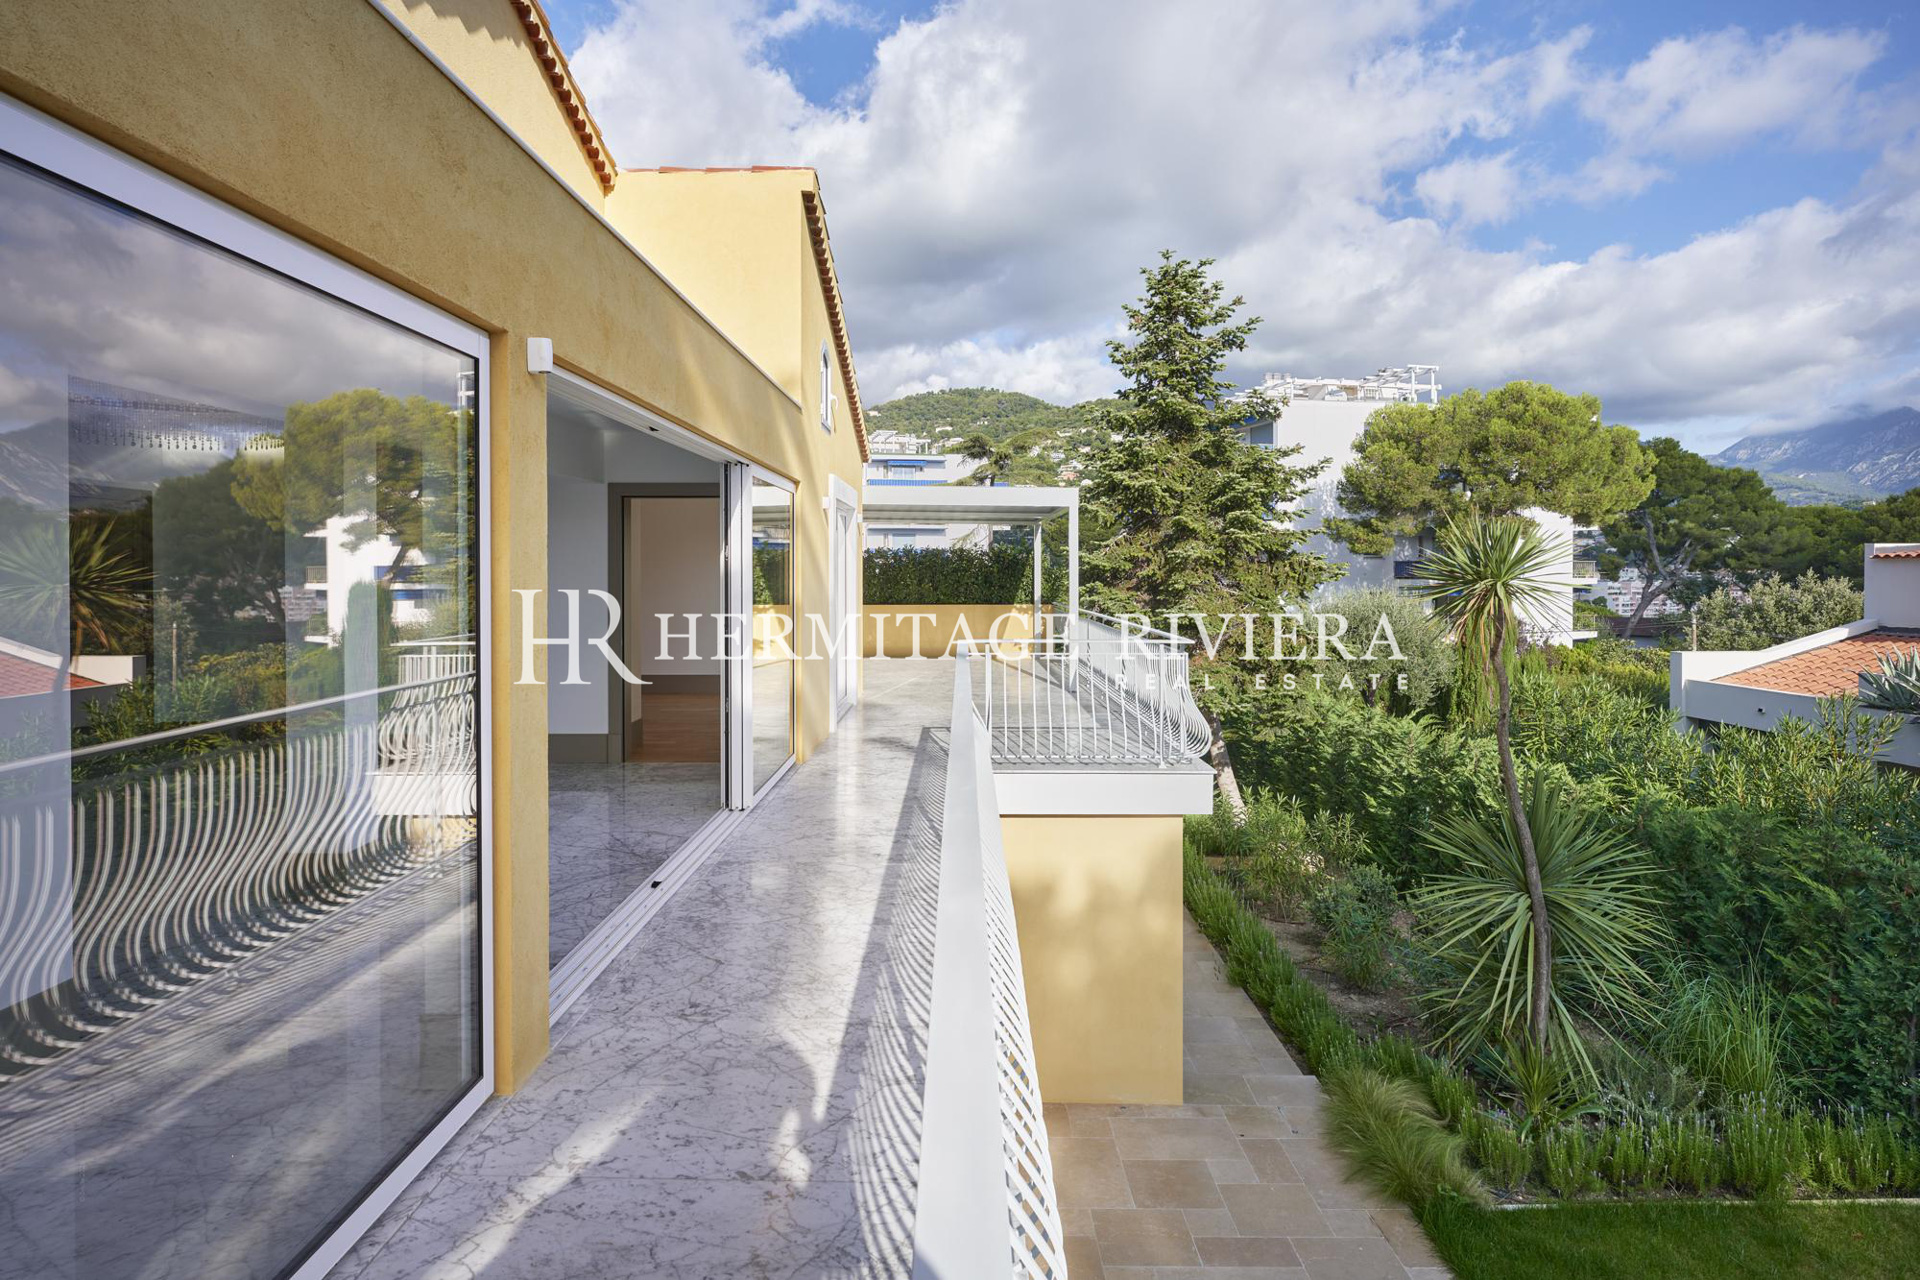 Beautifully appointed villa offering views of the sea and Italian coast (image 9)